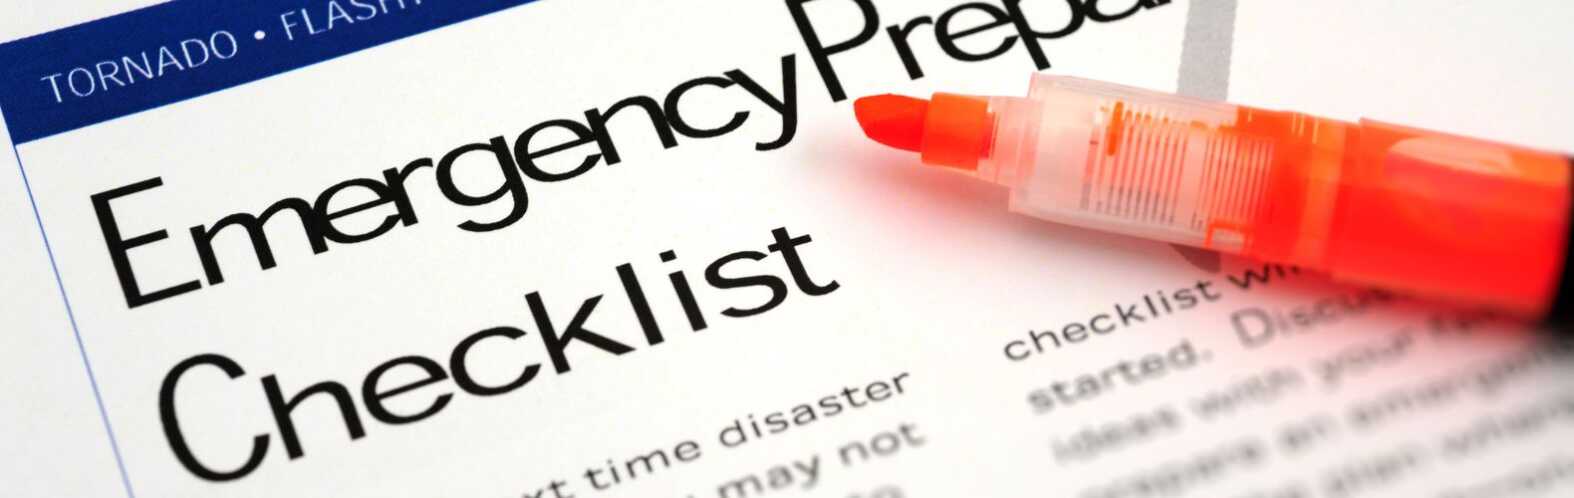 emergency checklist with highlighter